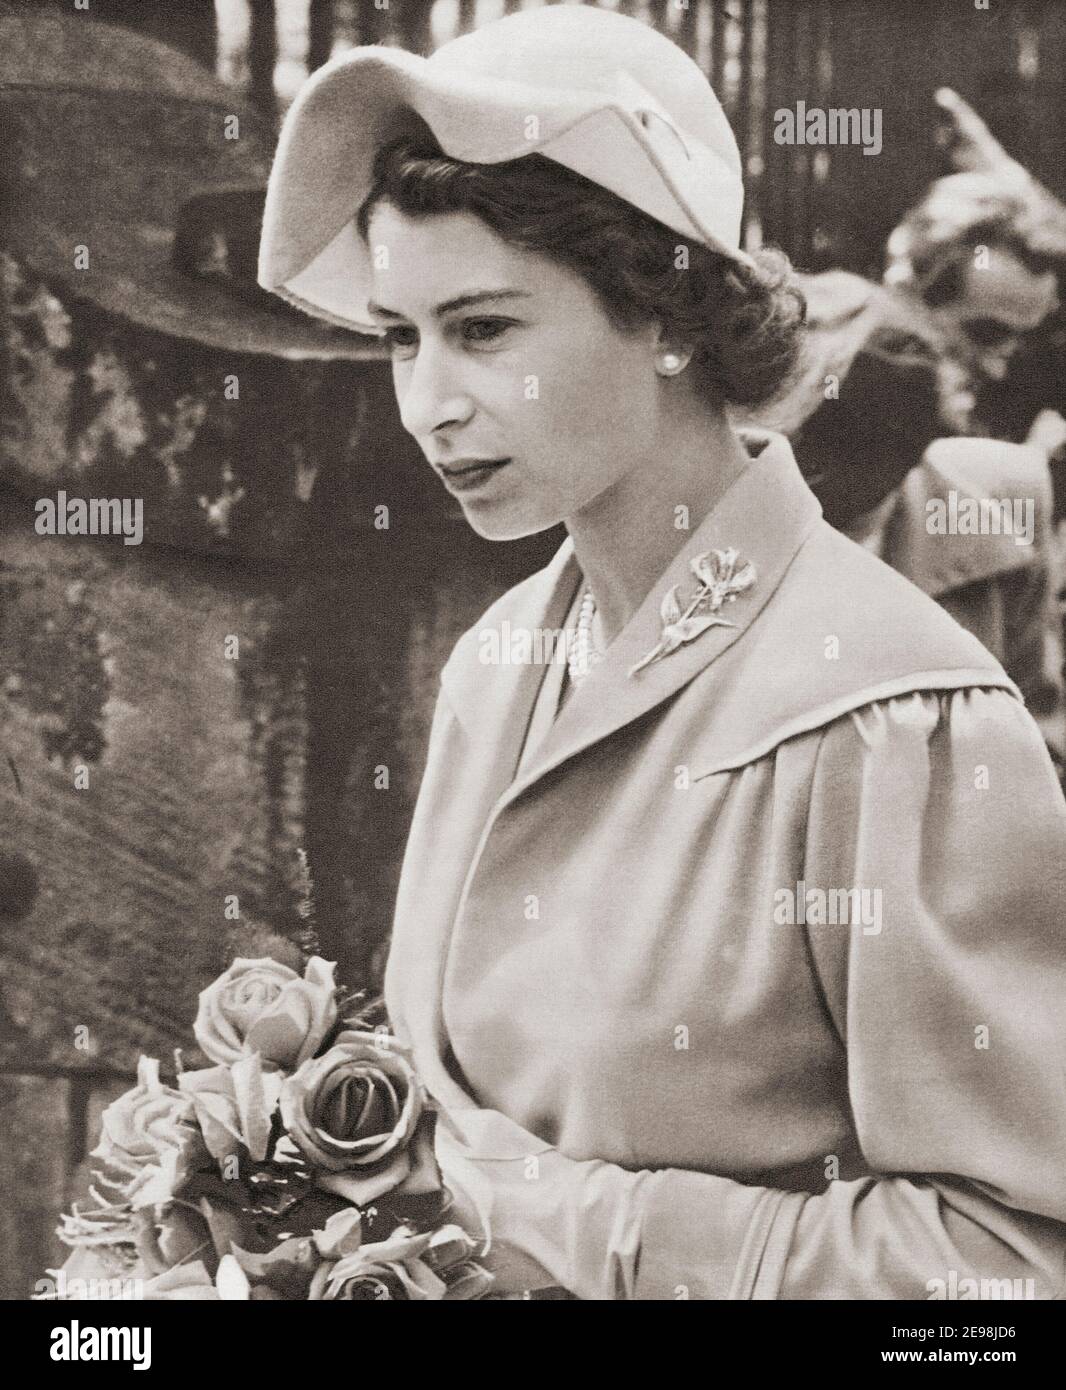 EDITORIAL ONLY Queen Elizabeth II seen here in 1952.  Elizabeth II, Queen of the United Kingdom, 1926 - 2022.  From The Queen Elizabeth Coronation Book, published 1953. Stock Photo